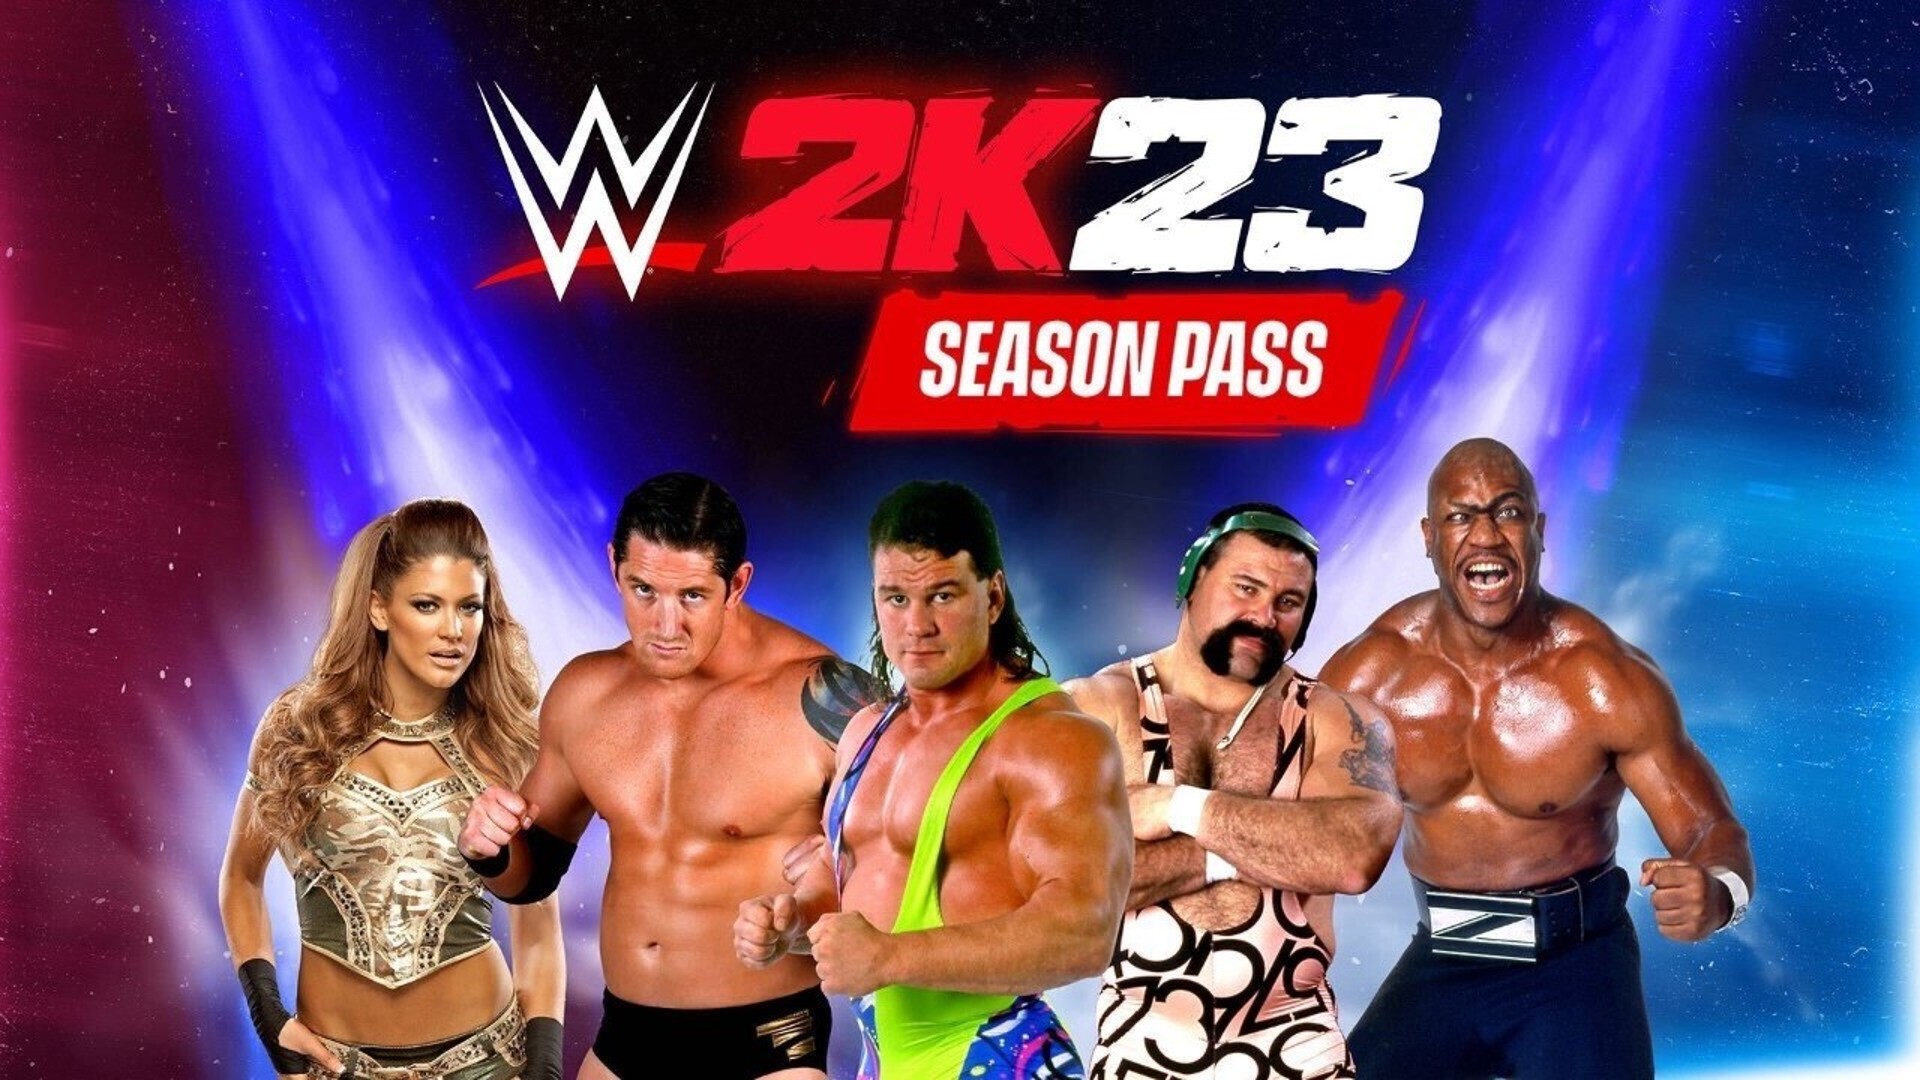 WWE 2K22 DLC Guide: All Characters Packs and Release Dates